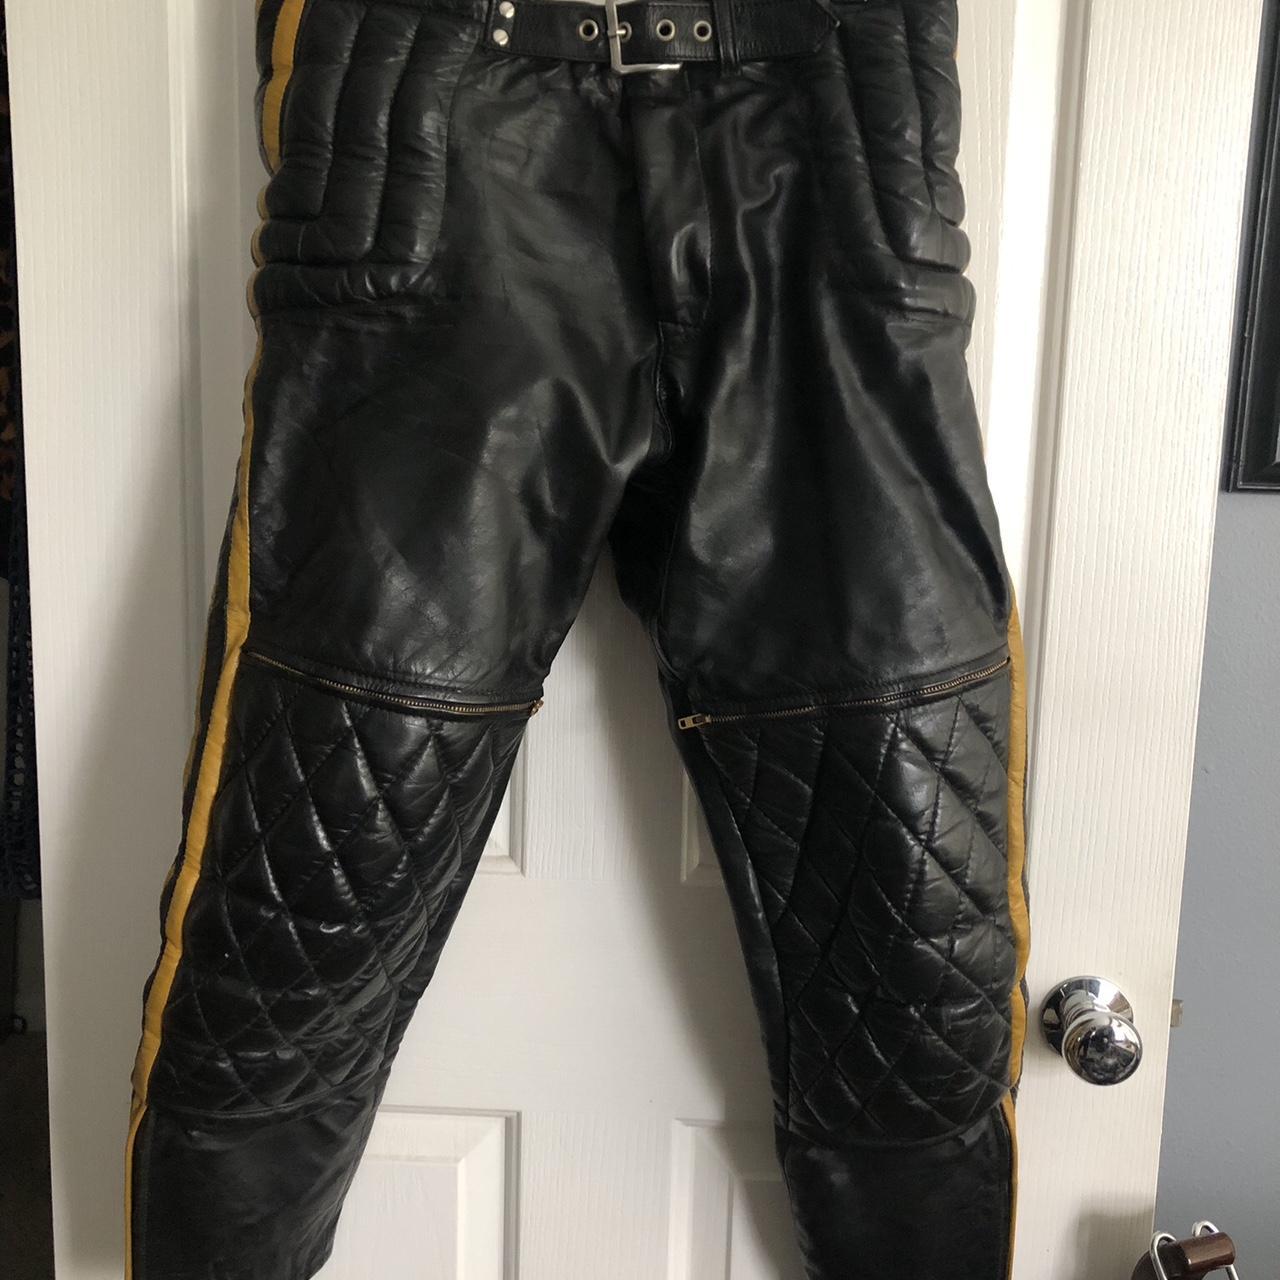 Vintage Leather Motorcycle Riding Pants | EBTH